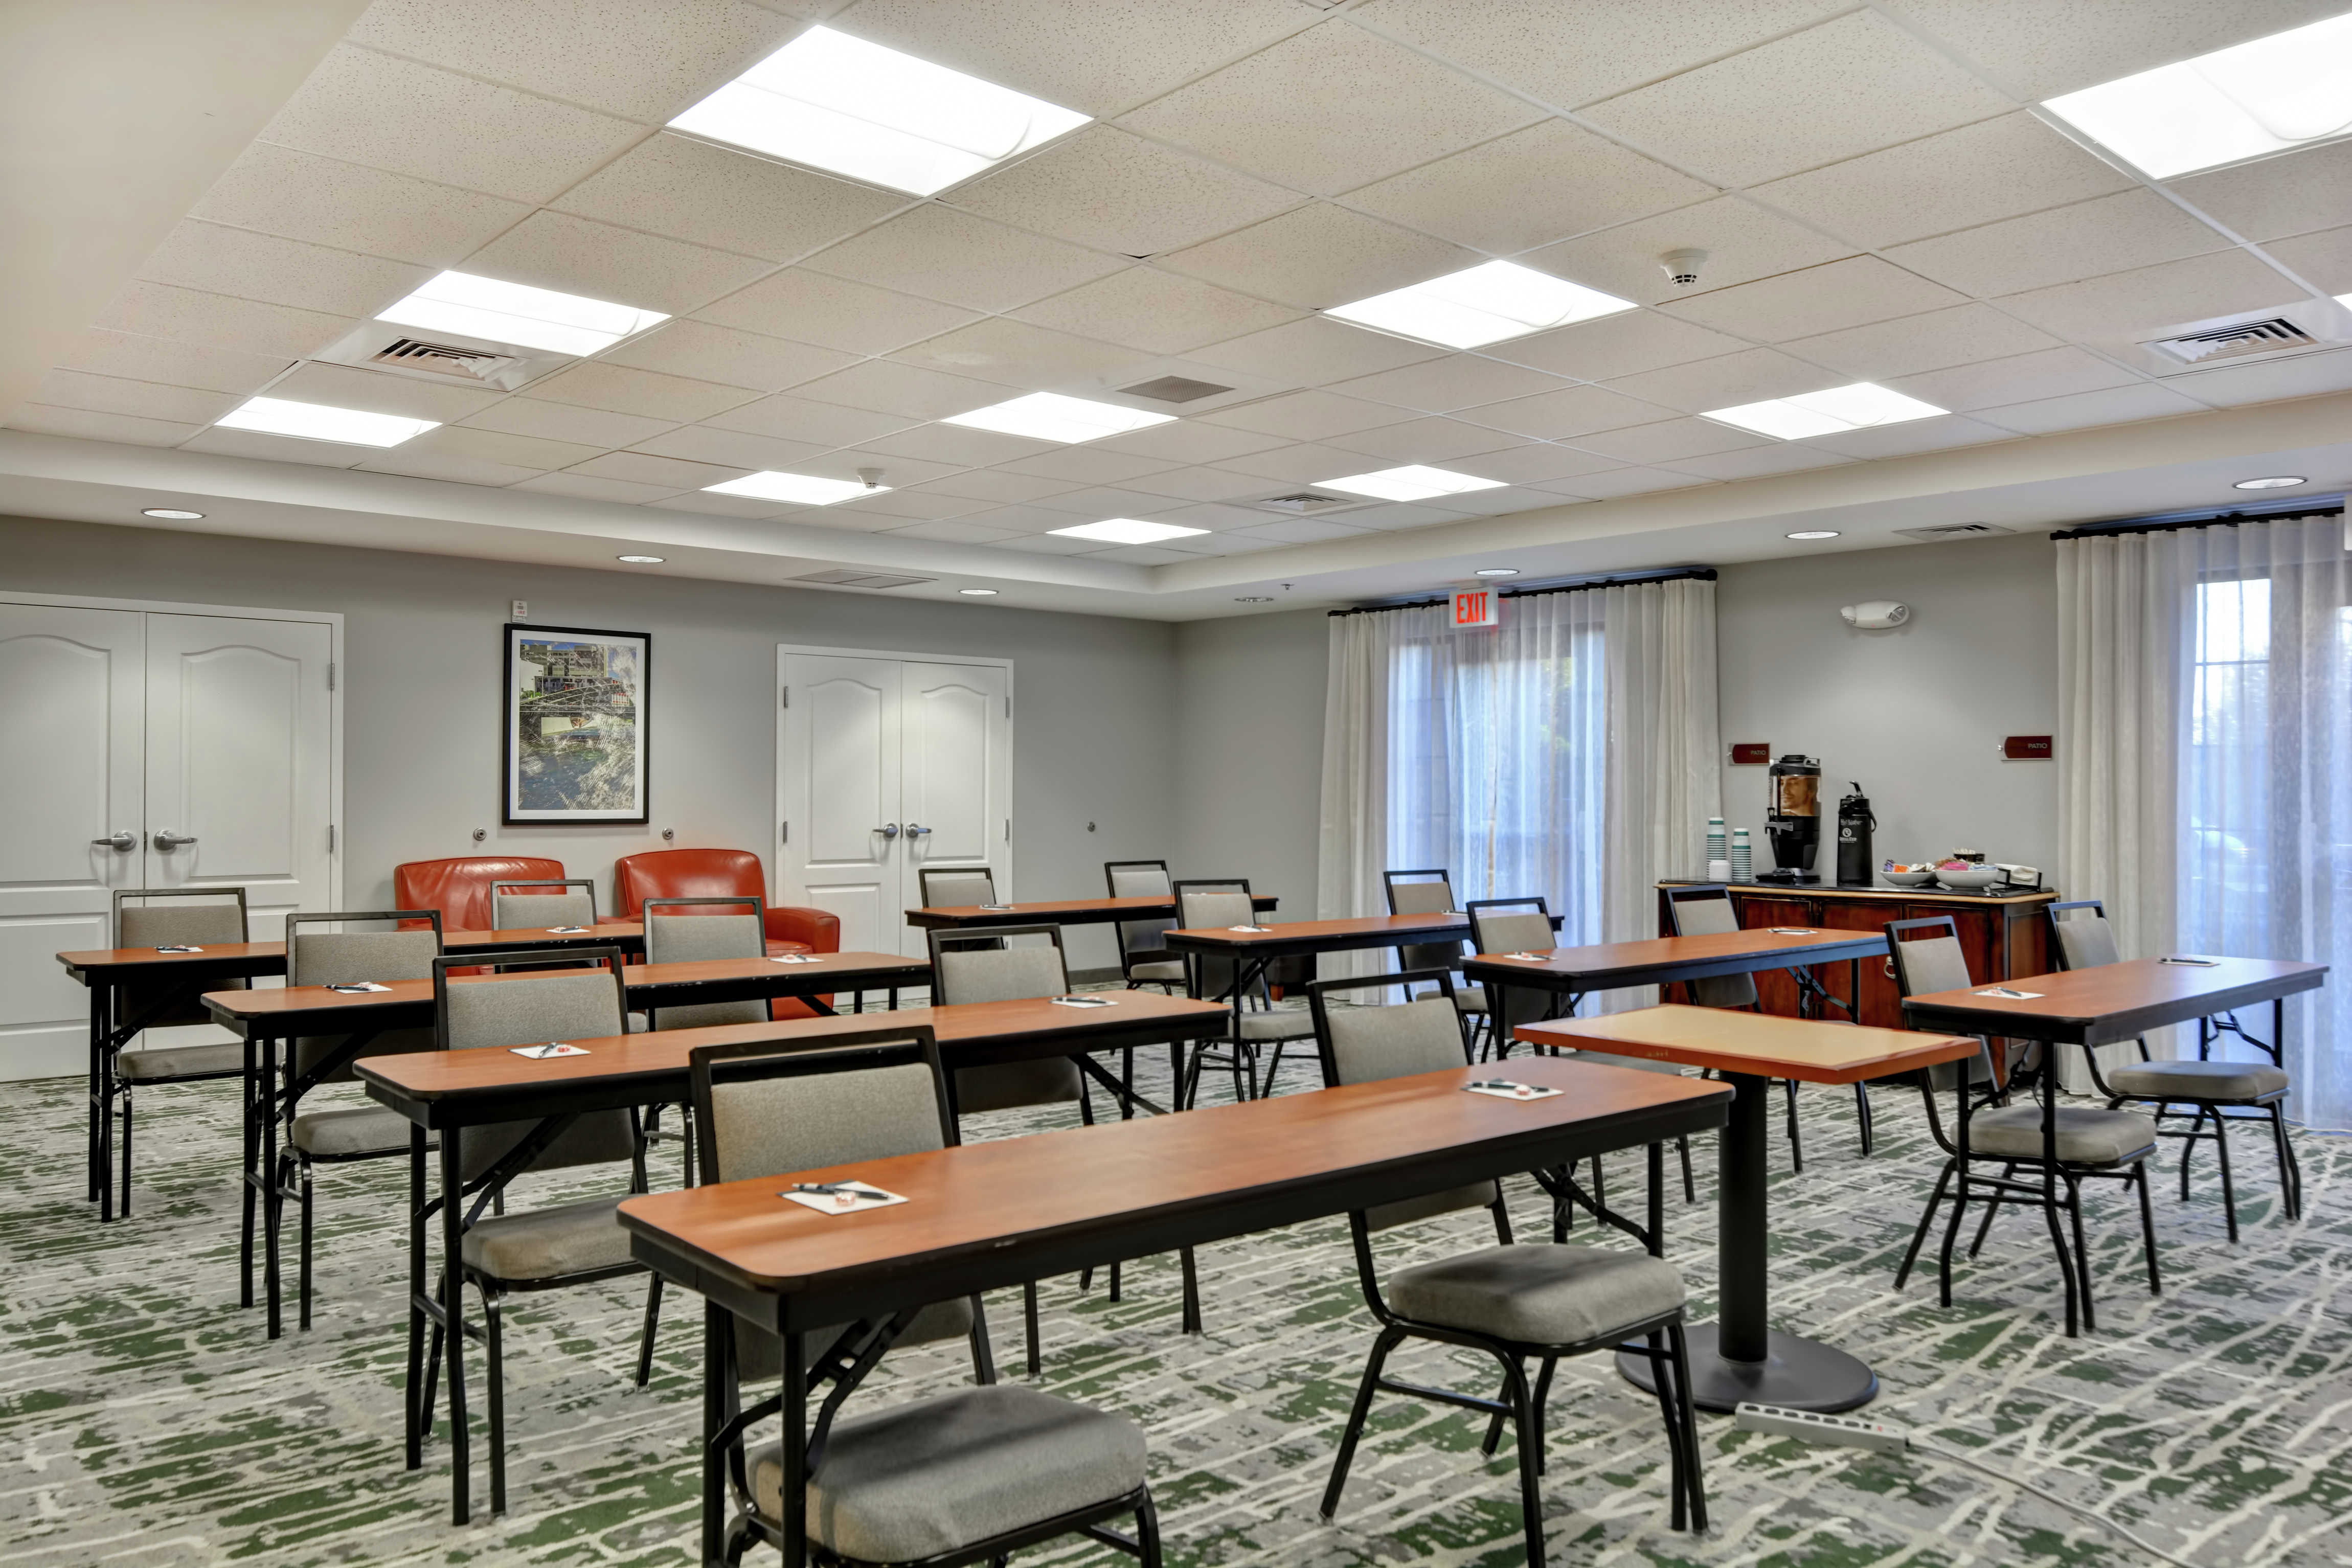 Meeting Room Space with Tables and Seating Arrangement